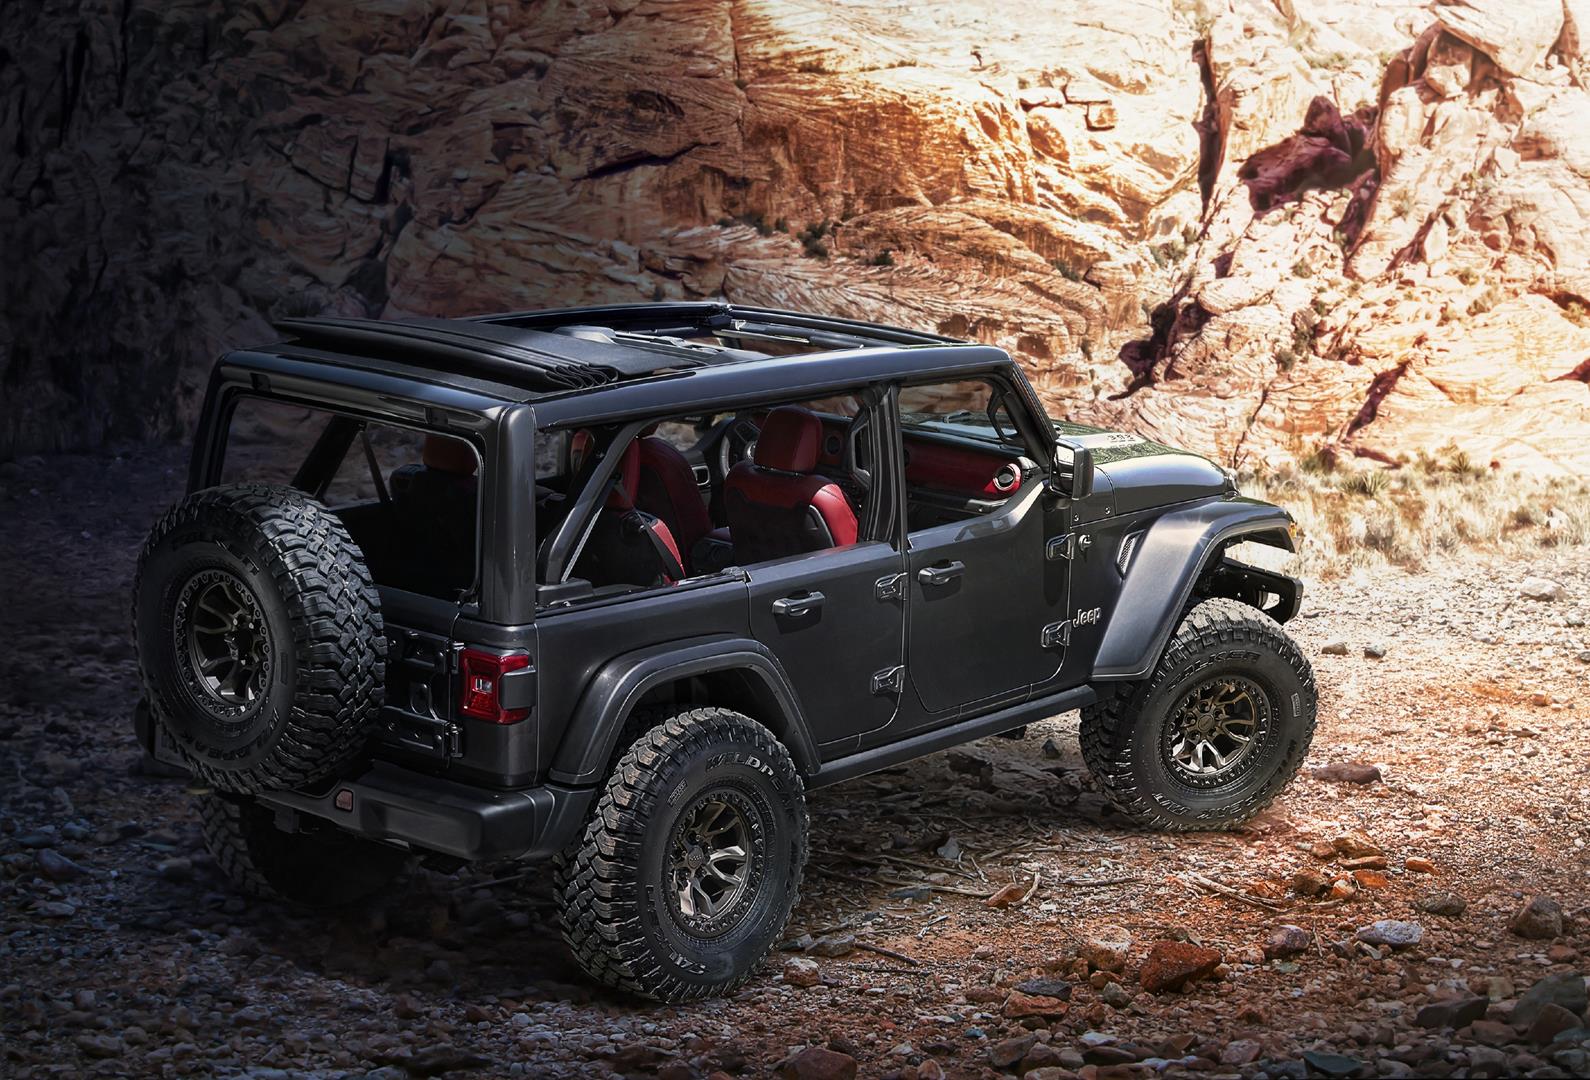 Can't Wait — Jeep Wrangler Rubicon 392 Concept Teased - Motoring World